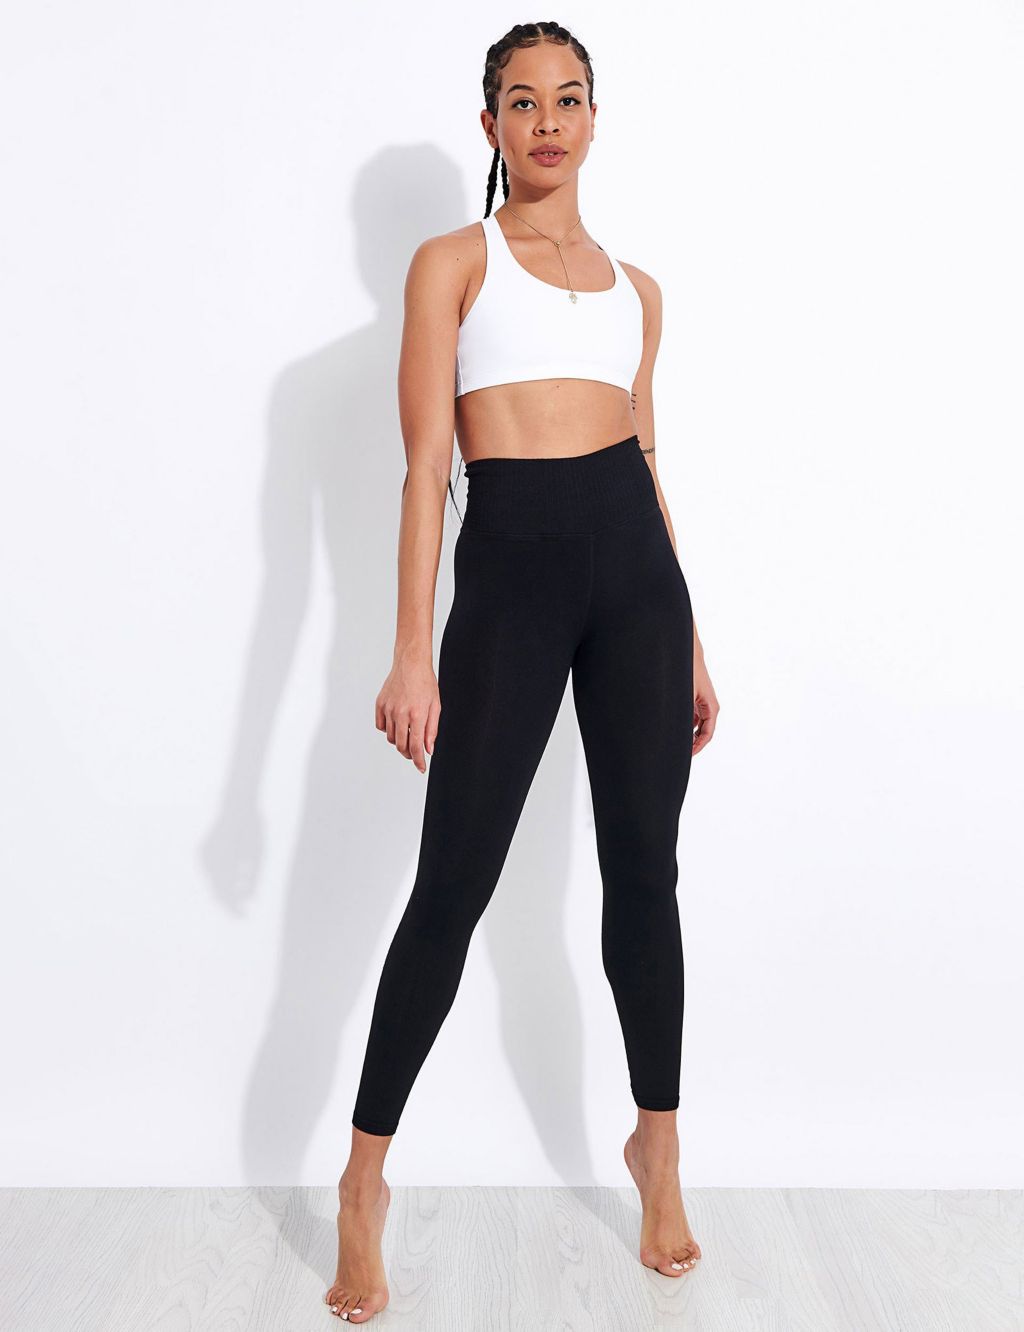 Buy Page 2 - Women’s Black Leggings from the M&S UK Online Shop